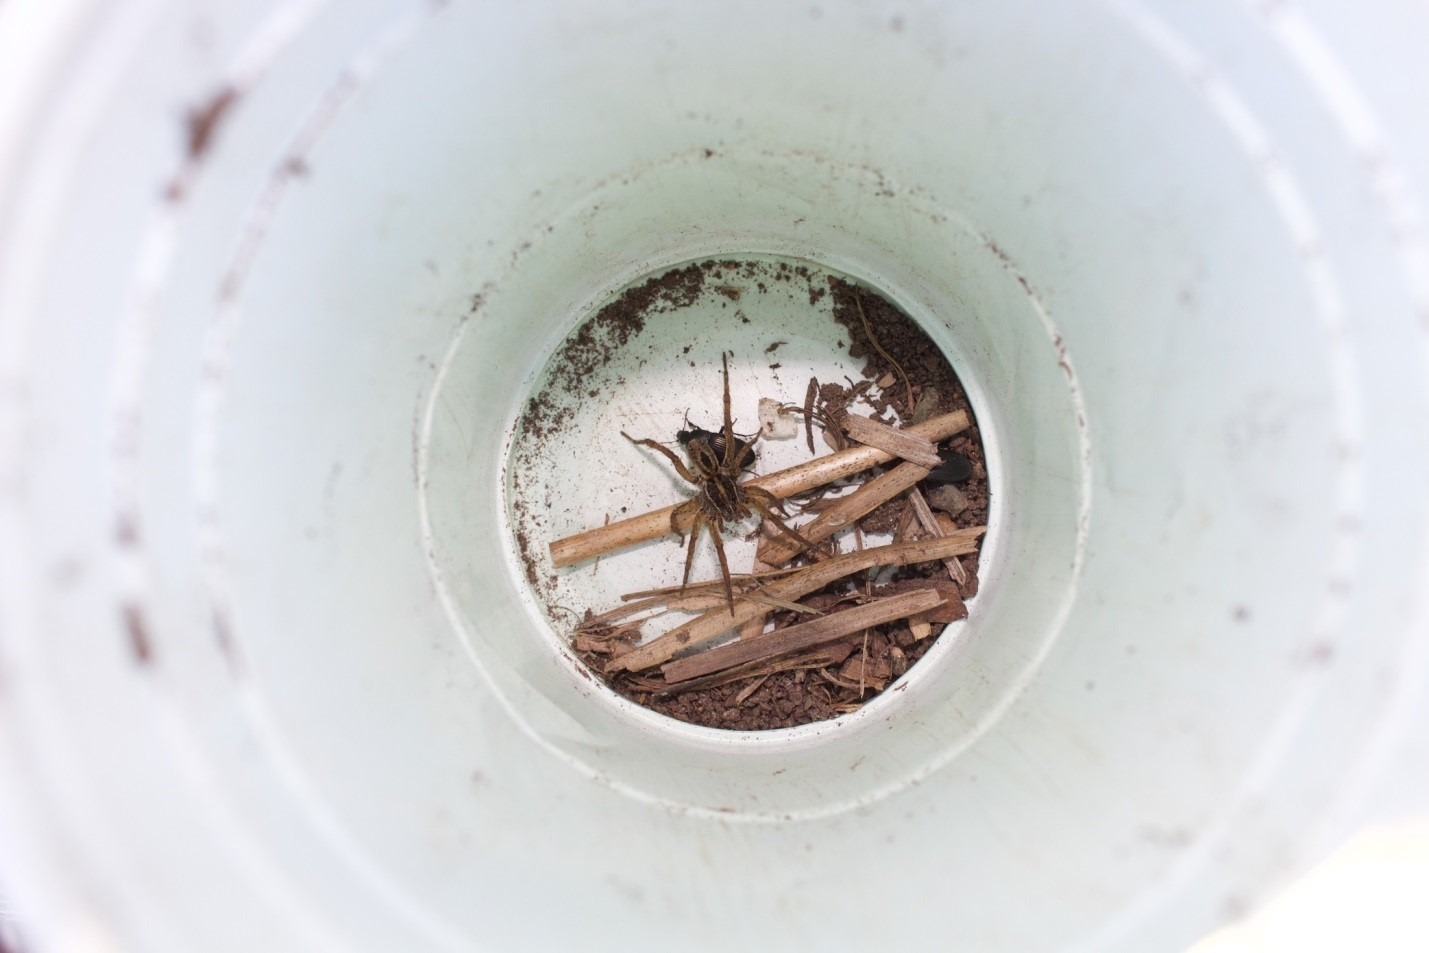 A wolf spider on a circle